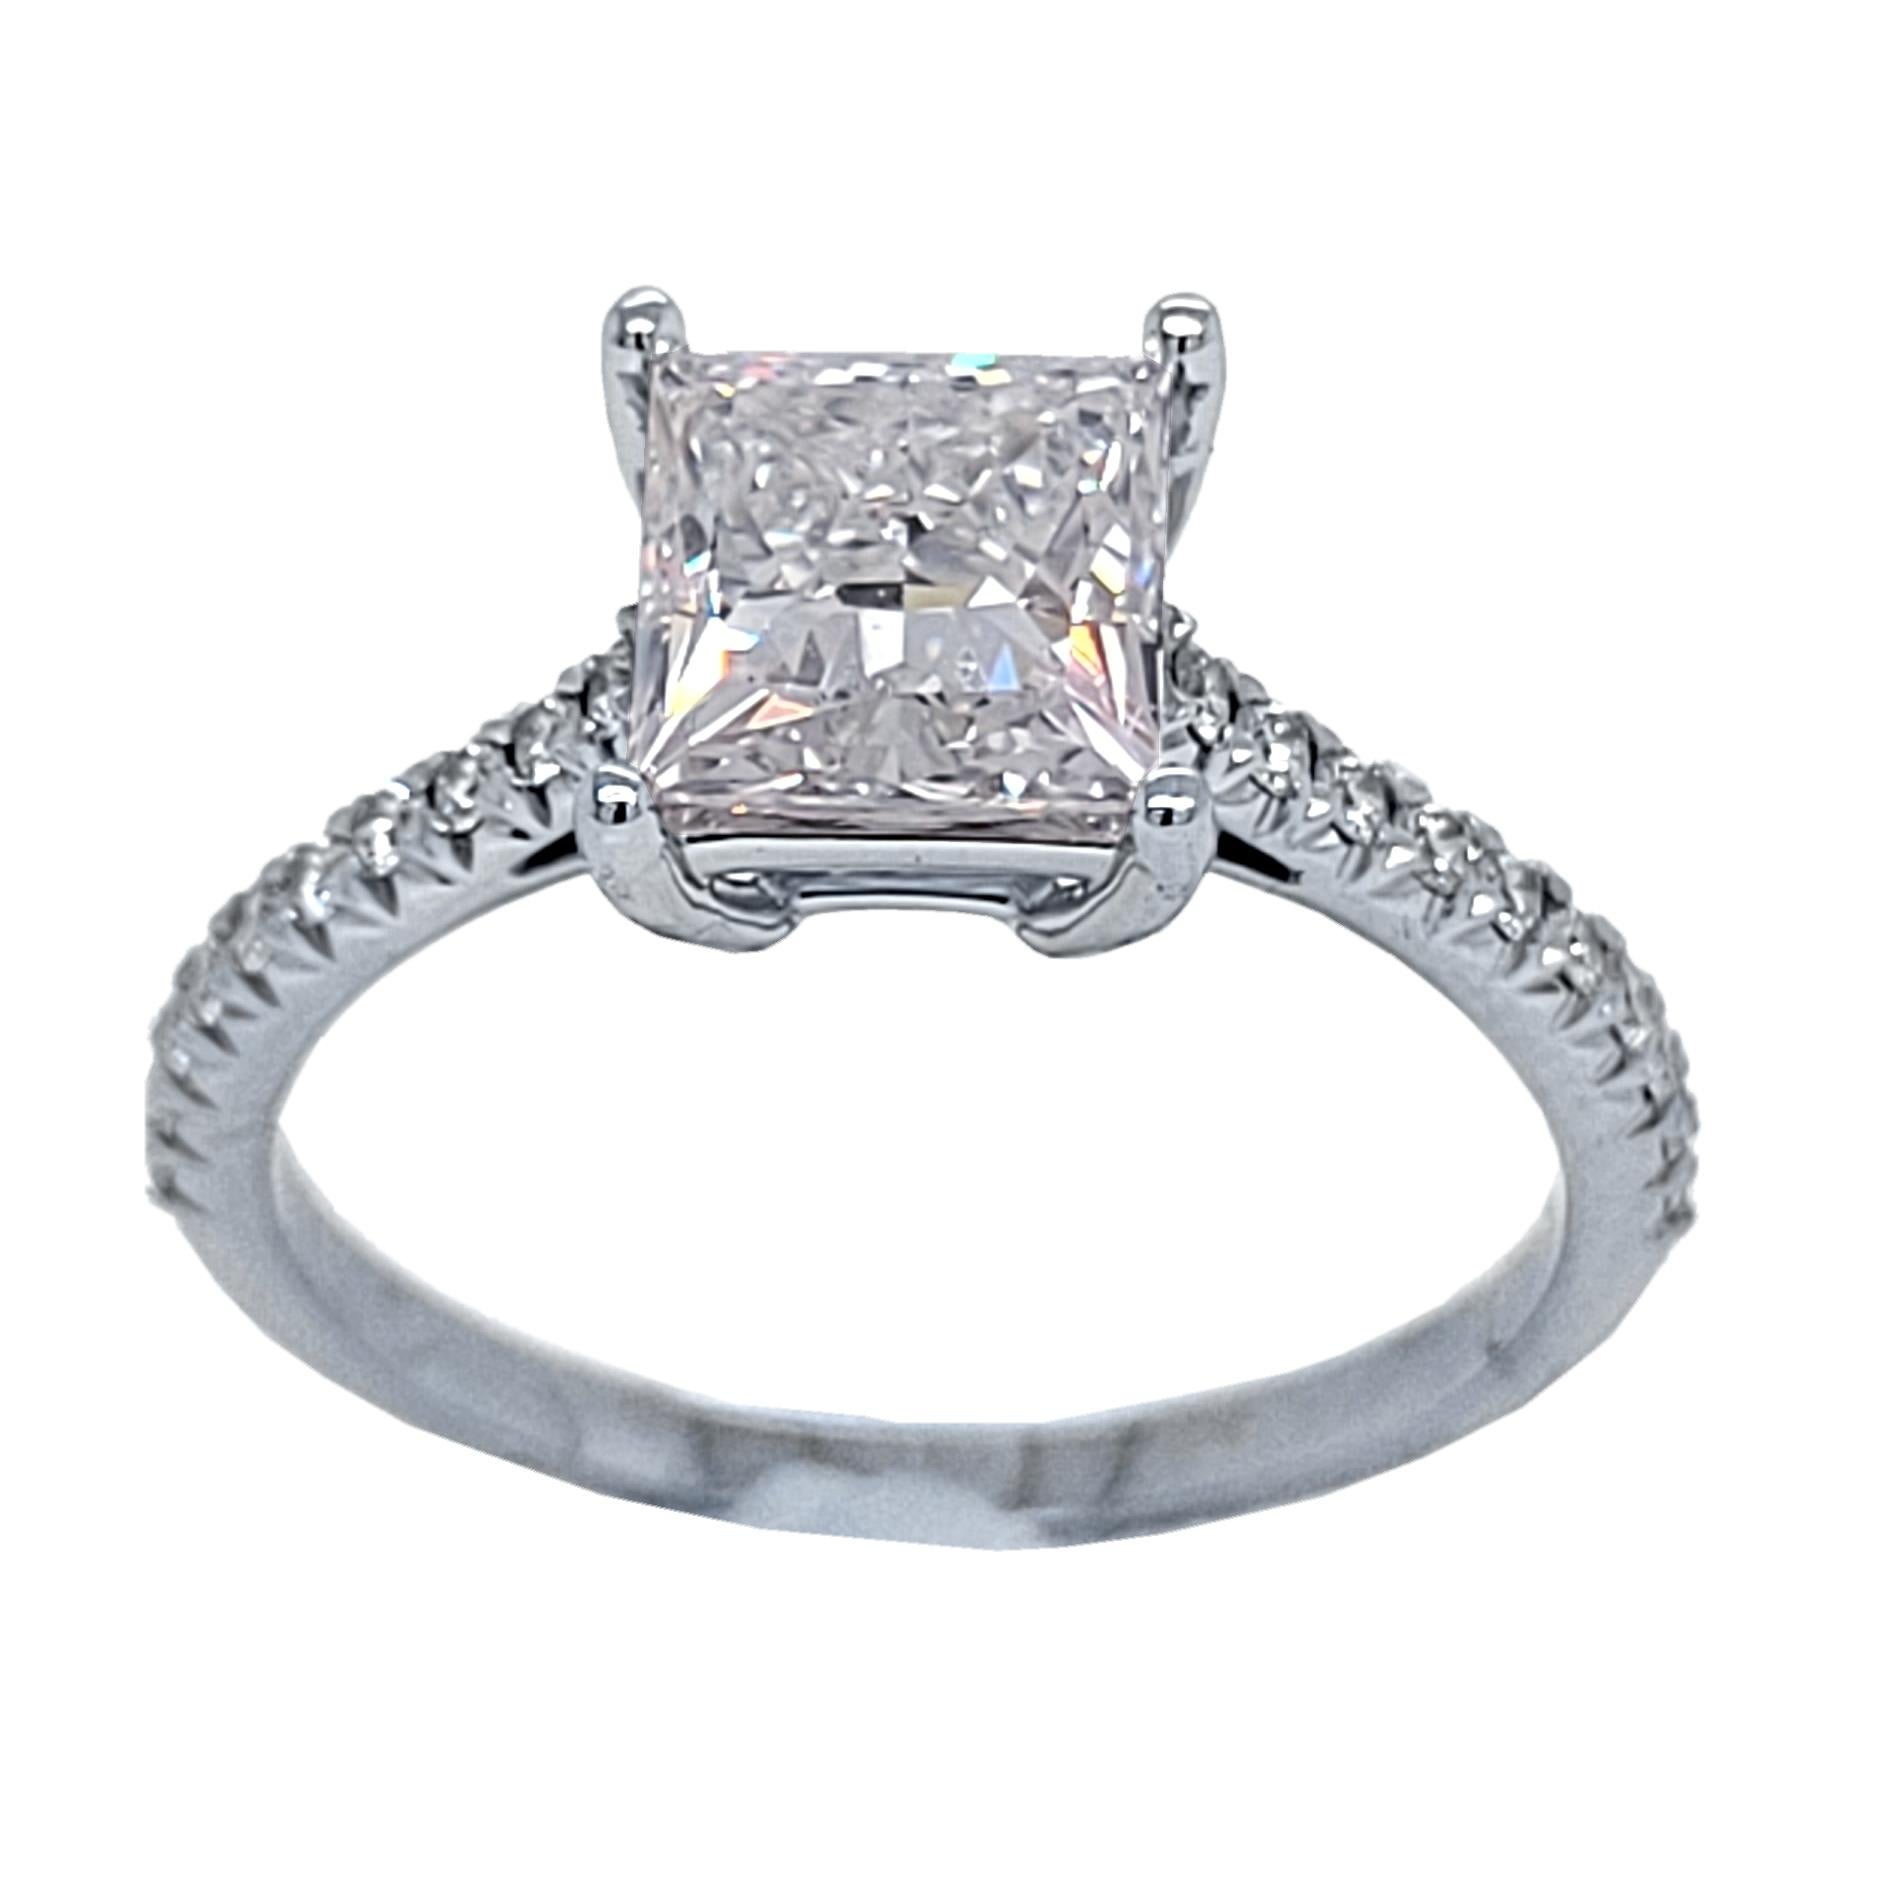 Tiffany & Co., platinum Novo® diamond Engagement ring and wedding band set. Emgagement Ring's center stone is one GIA certified princess cut diamond weighing 1.51 ct. The stone is lifted above the scintillating diamond band to create an